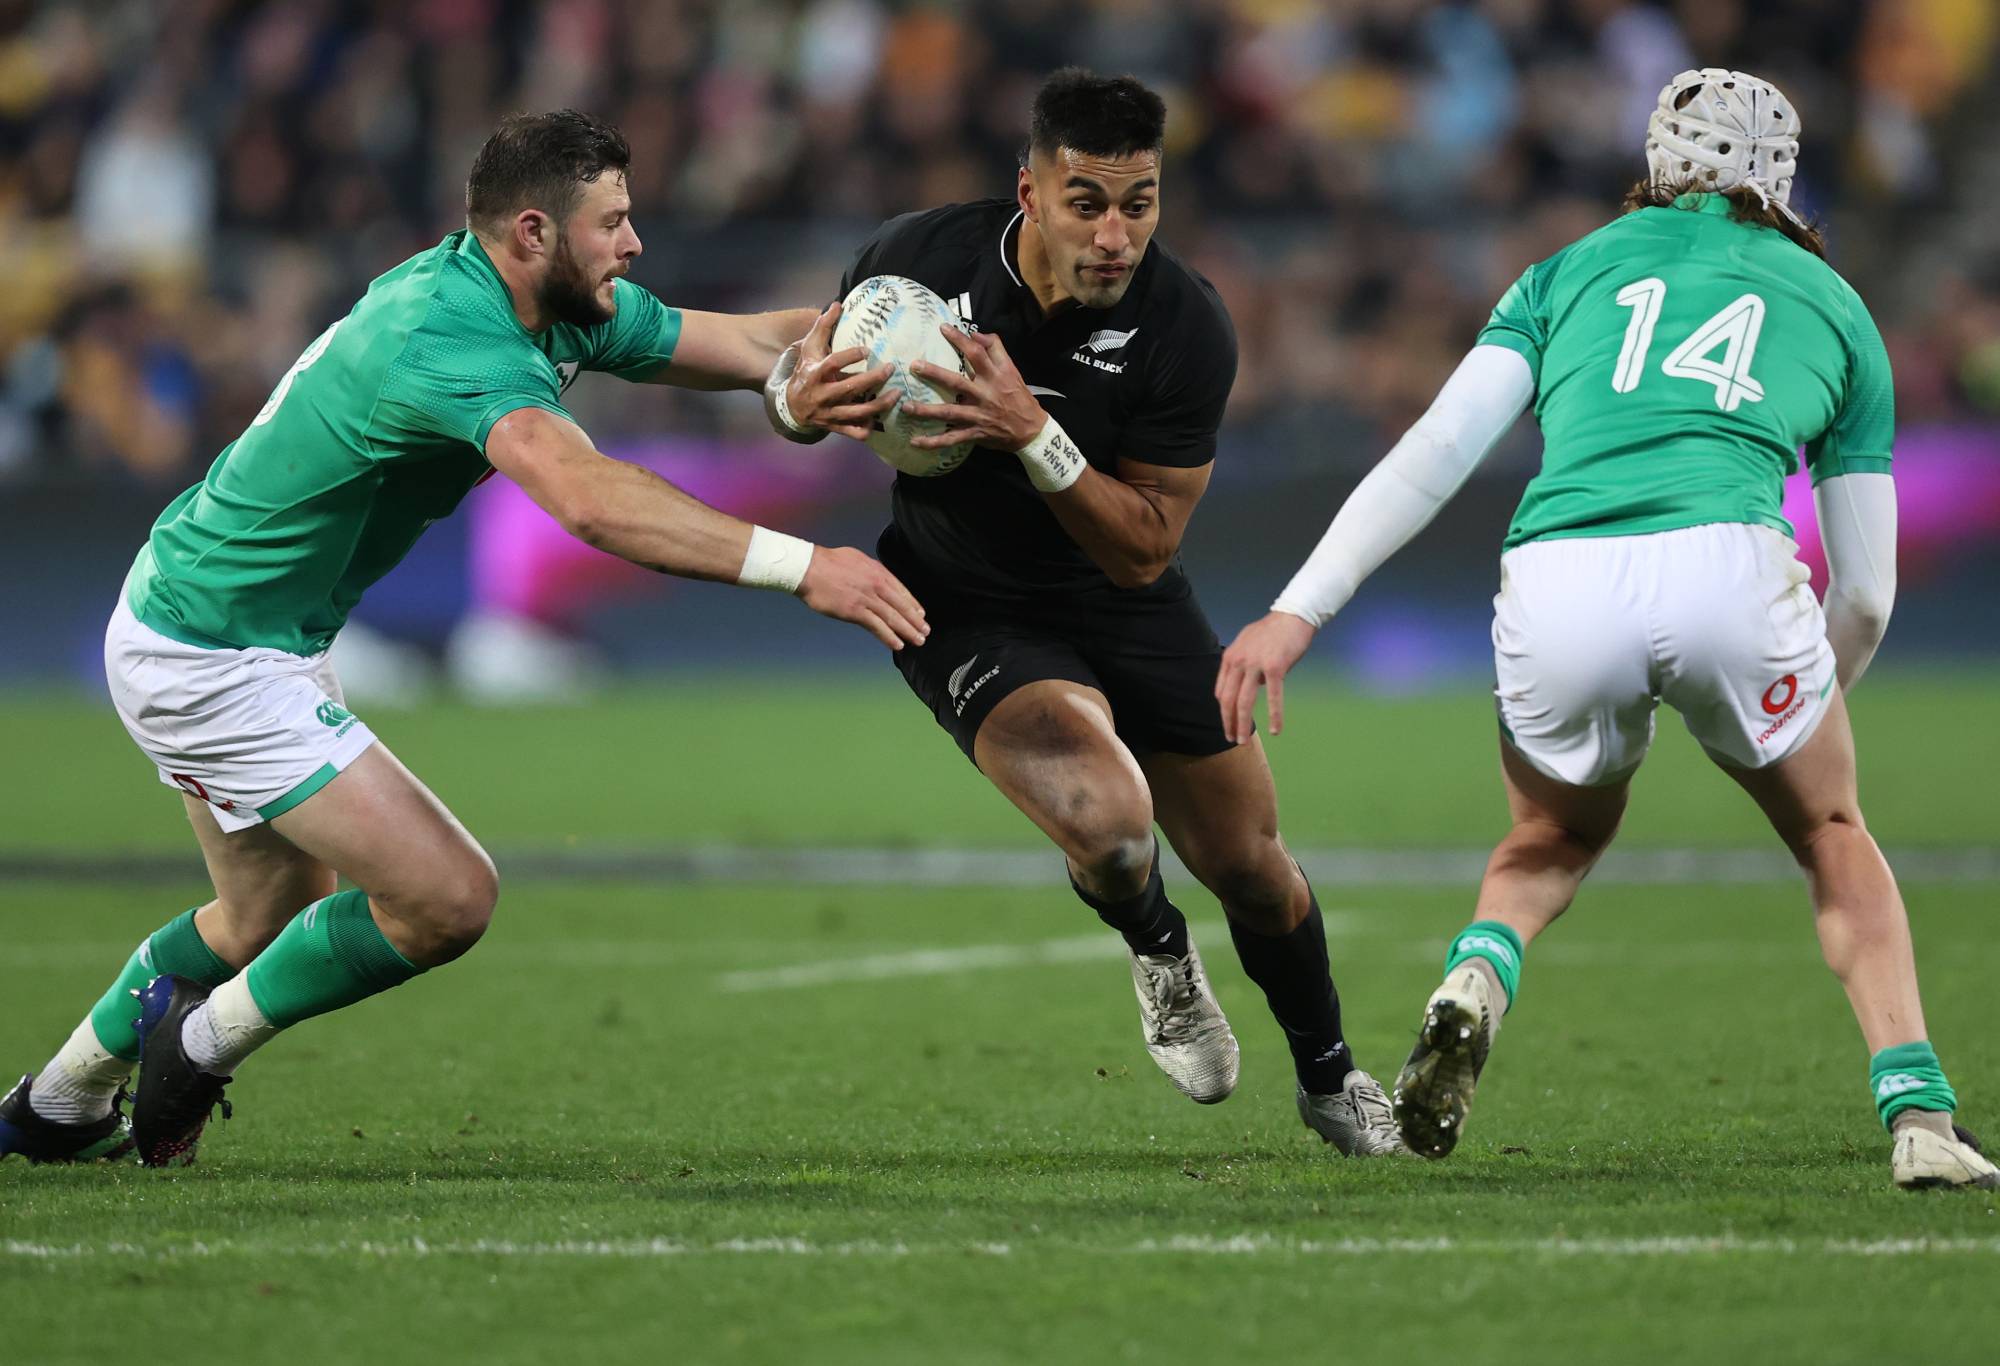 Rieko Ioane of the All Blacks (C) looks for a gap during the International Test match between the New Zealand All Blacks and Ireland at Sky Stadium on July 16, 2022 in Wellington, New Zealand. (Photo by Phil Walter/Getty Images)